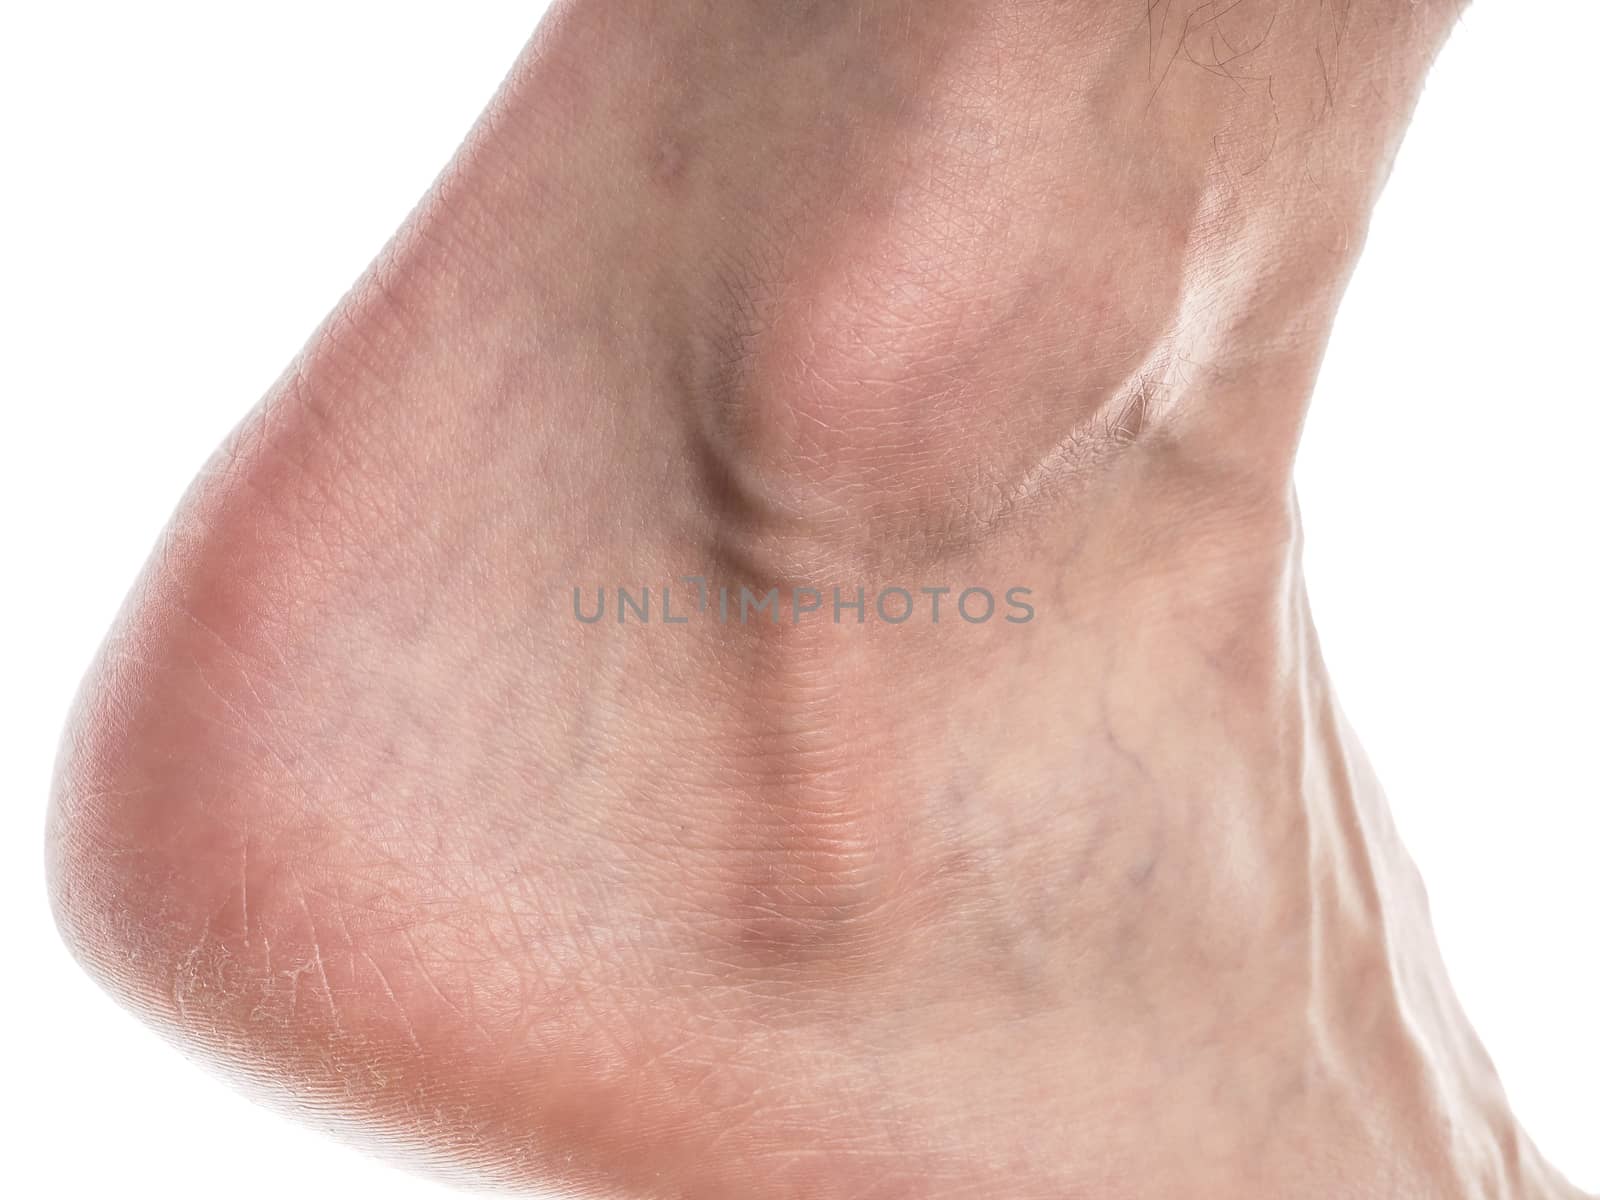 Closeup of a male ankle with dry skin on heal towards white